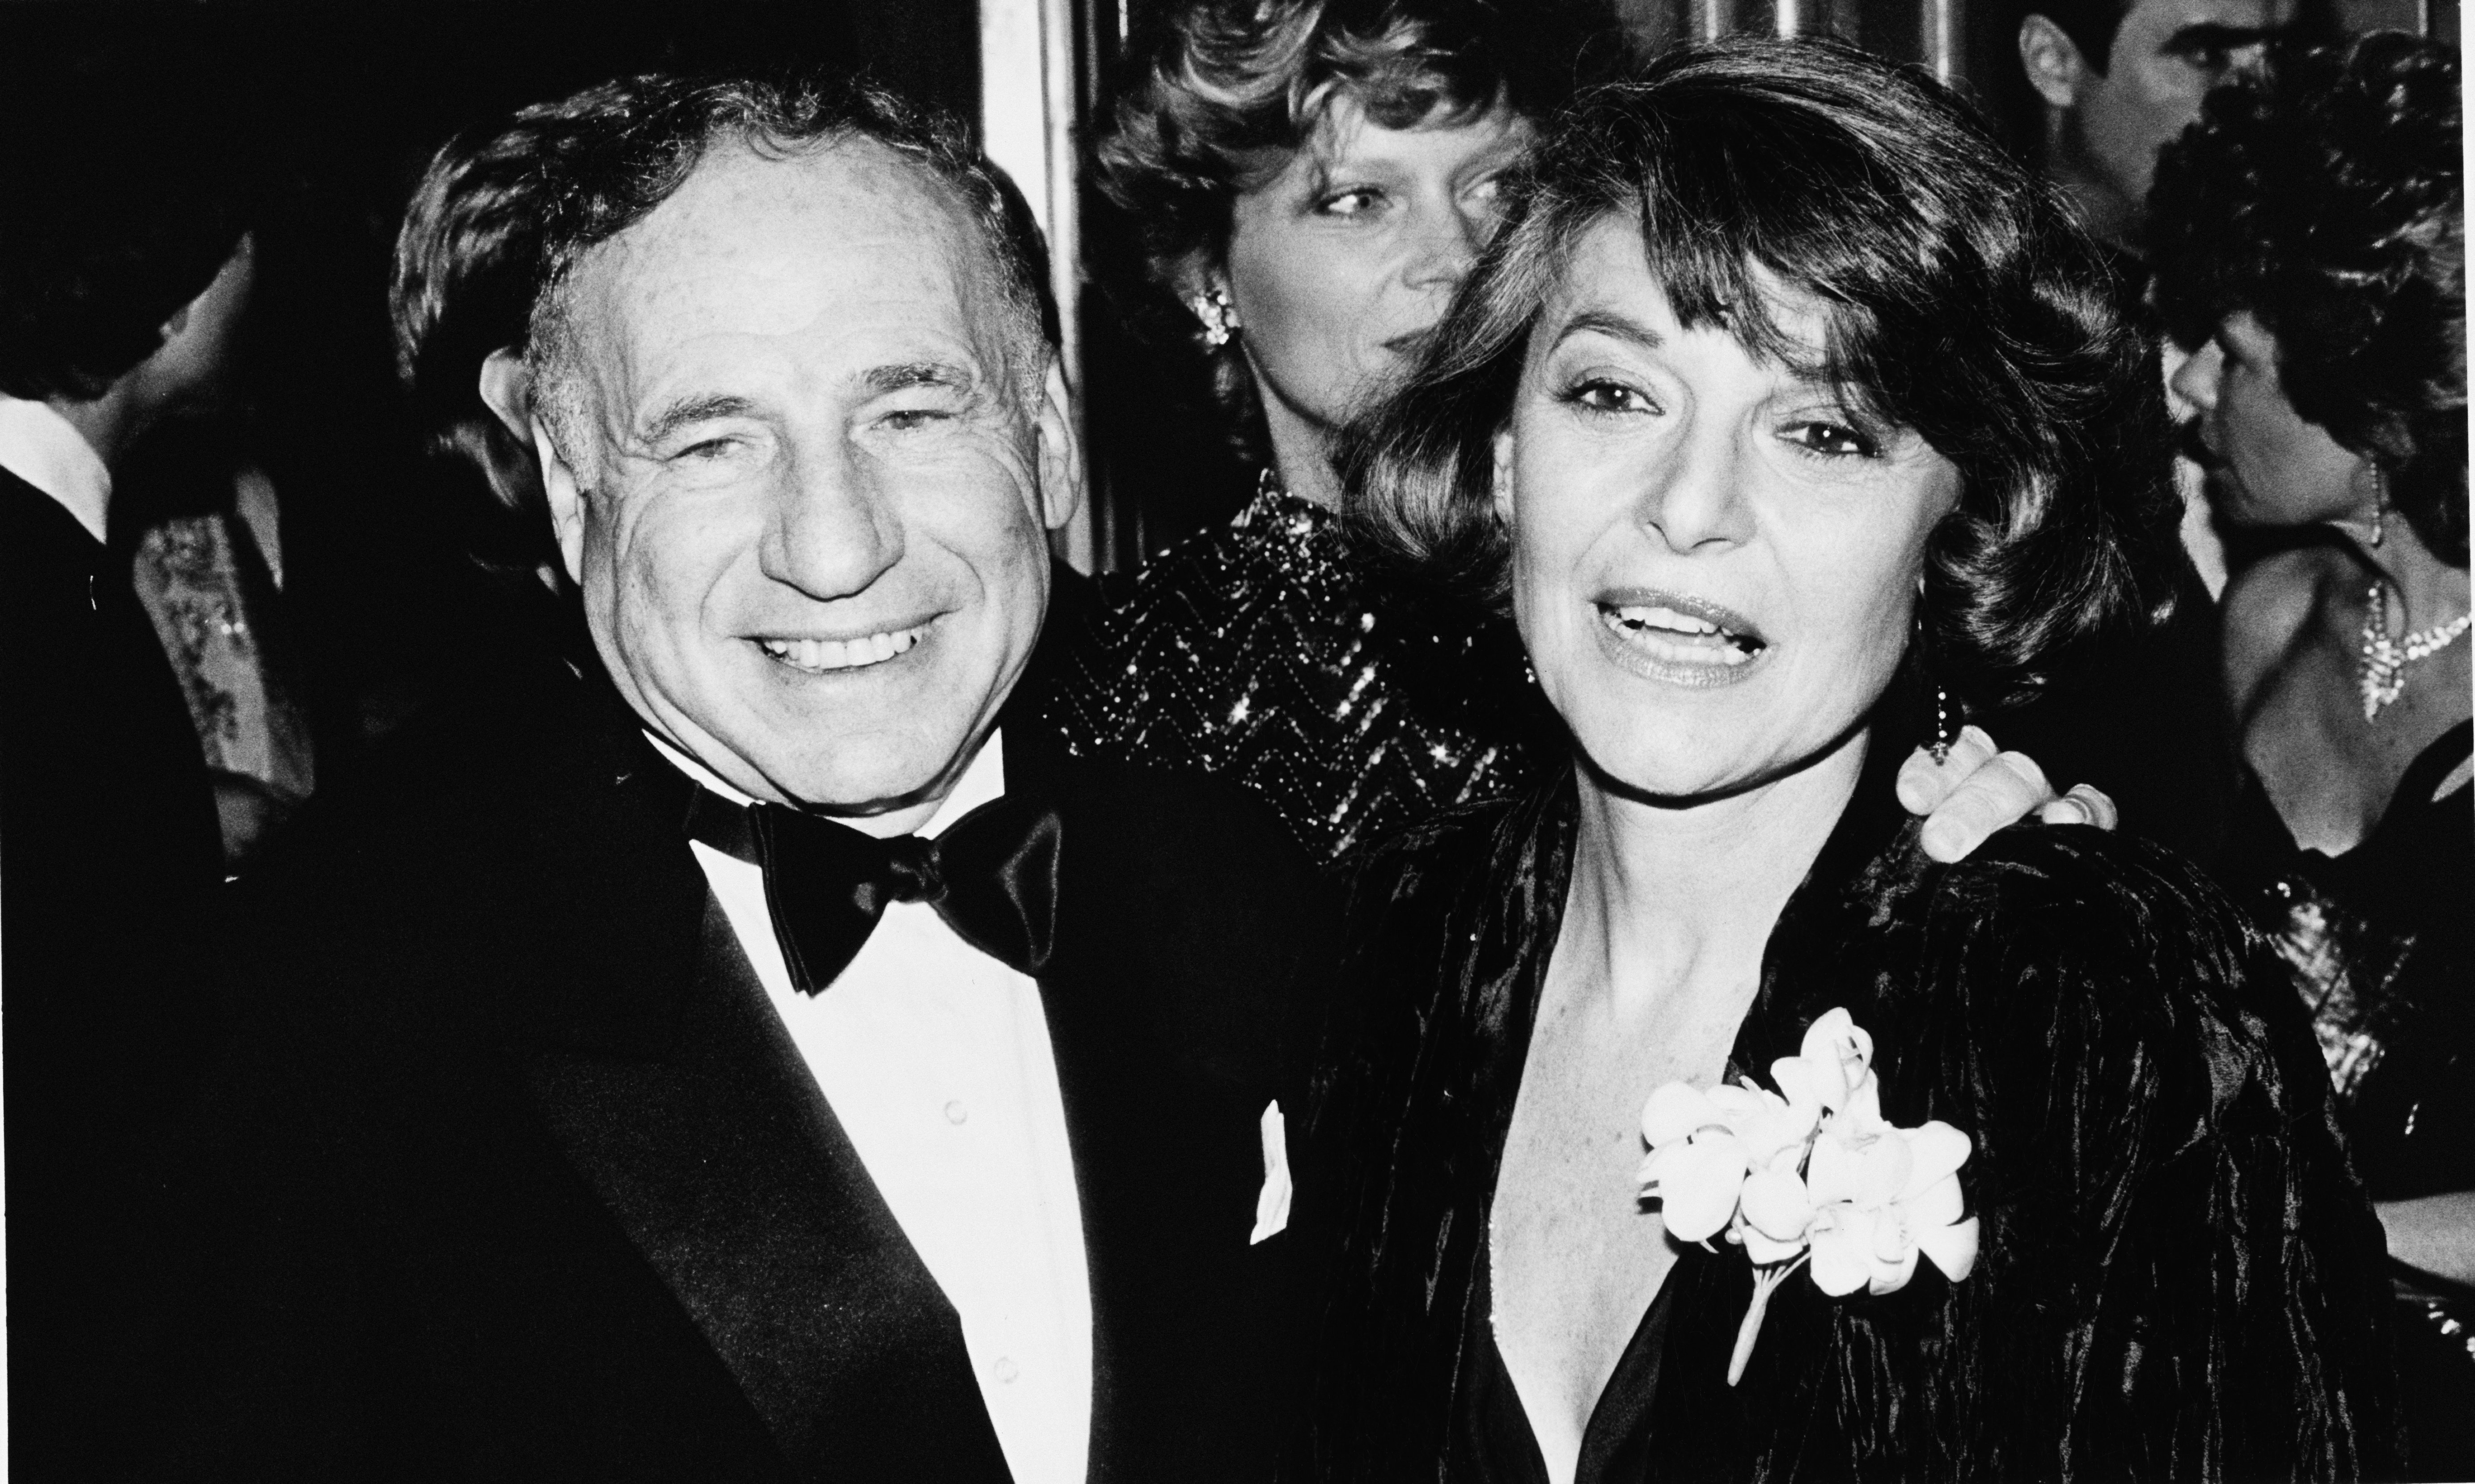  Mel Brooks and his wife, actress Anne Bancroft (1931 - 2005) attend the 44th Annual Golden Globe Awards. | Source: Getty Images